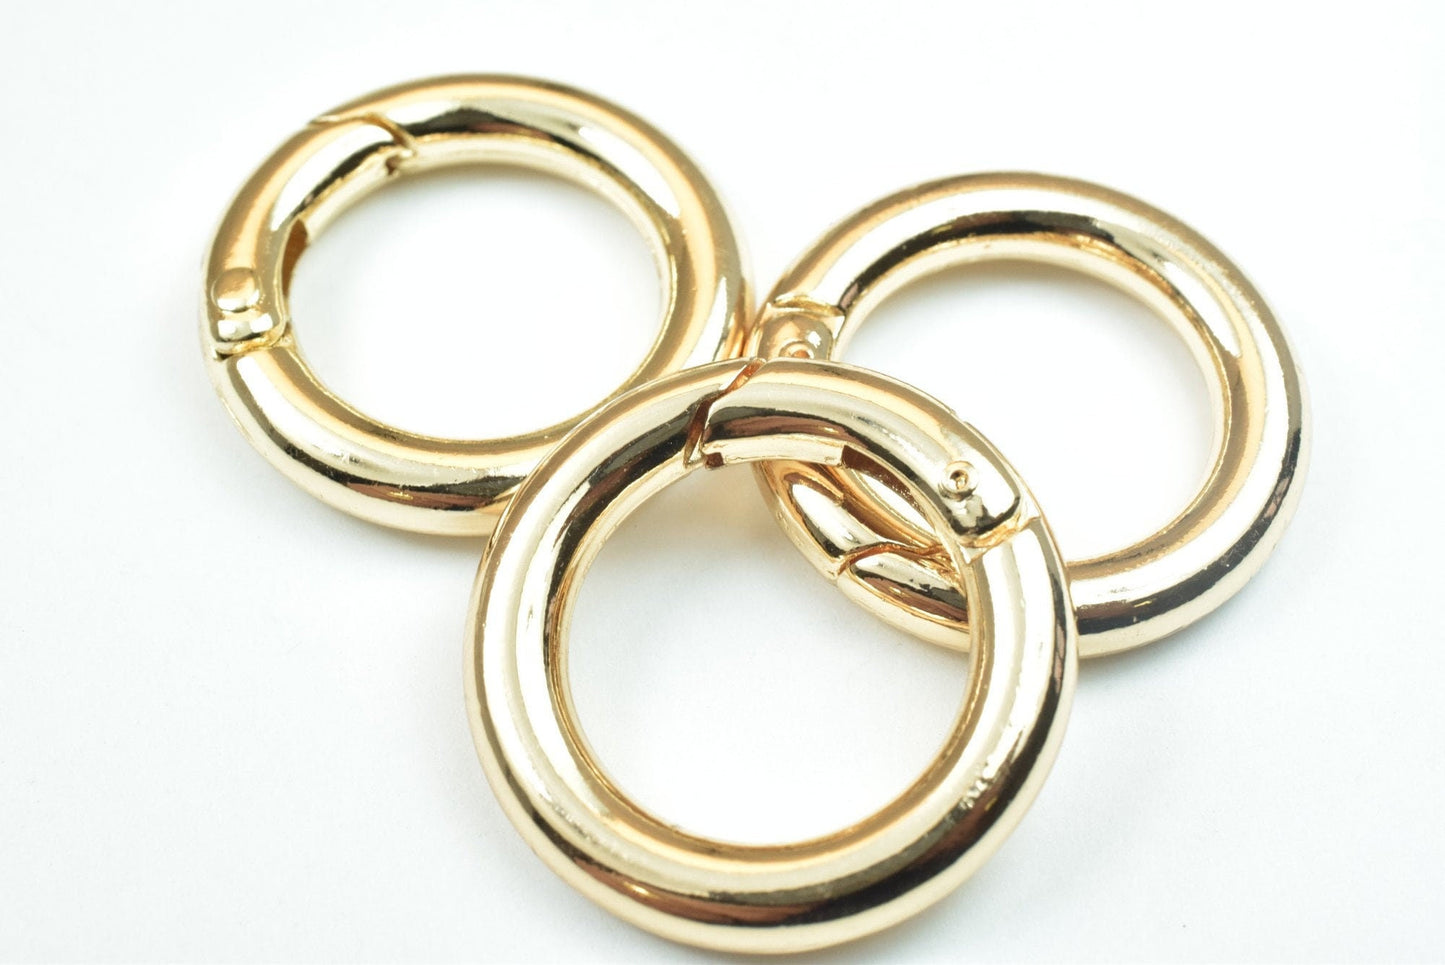 18k gold filled EP swivel spring clasp size 25mm/20mm/18mm jewelry findings parts for jewelry making gf7017a/gf7018a/gf7019a